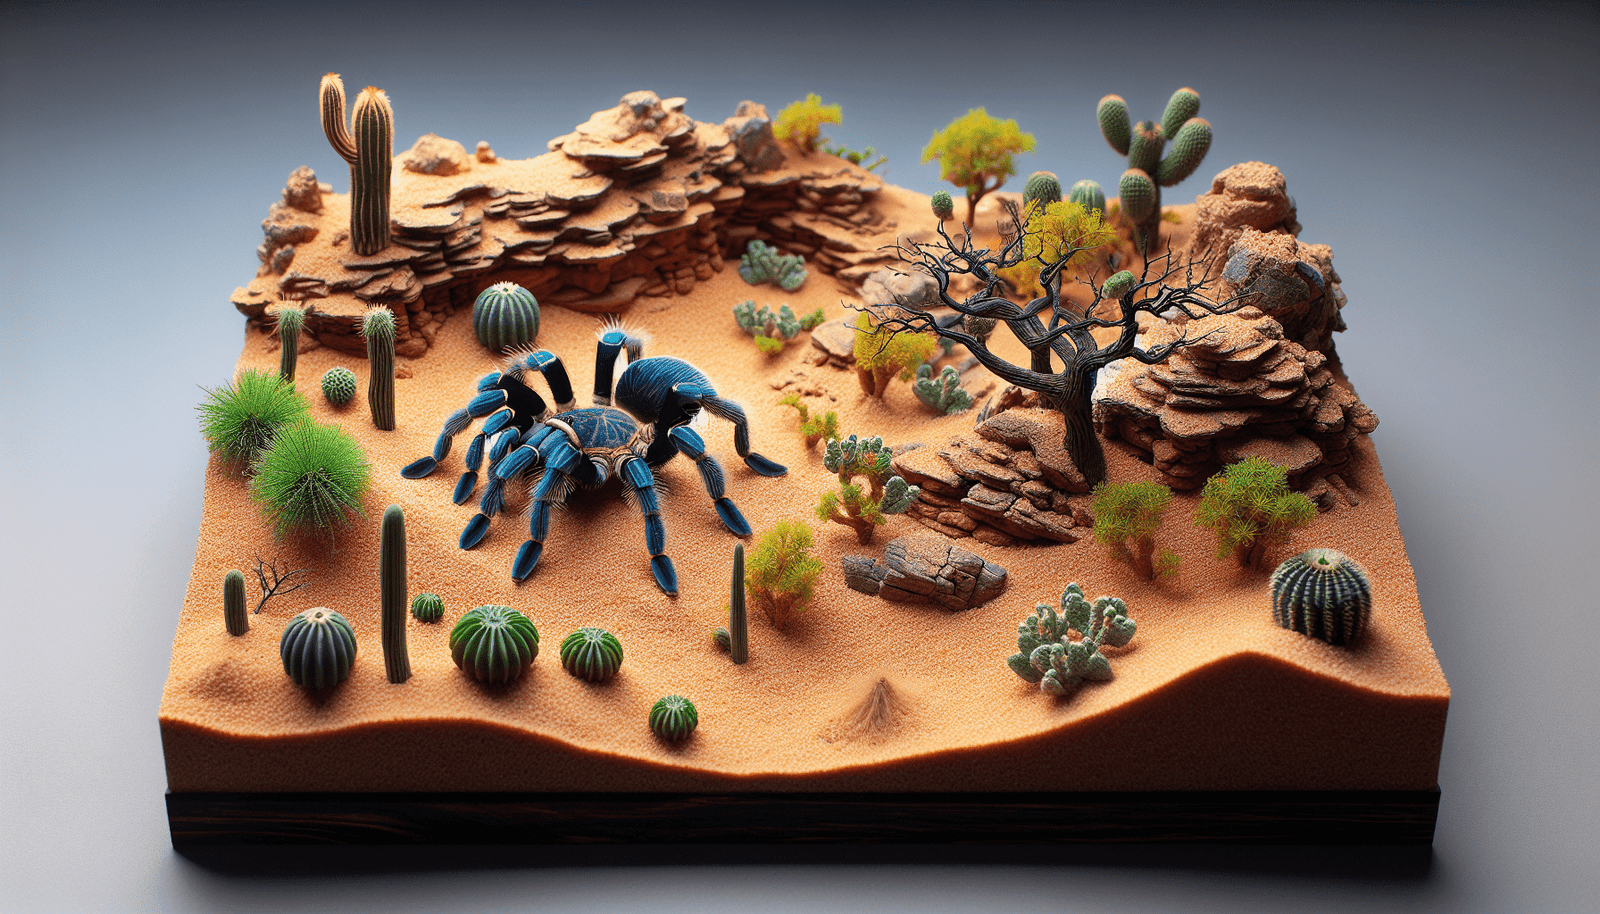 How Do You Replicate The Habitat Of The Enigmatic Blue Death-feigning Beetle Tarantula In Captivity?